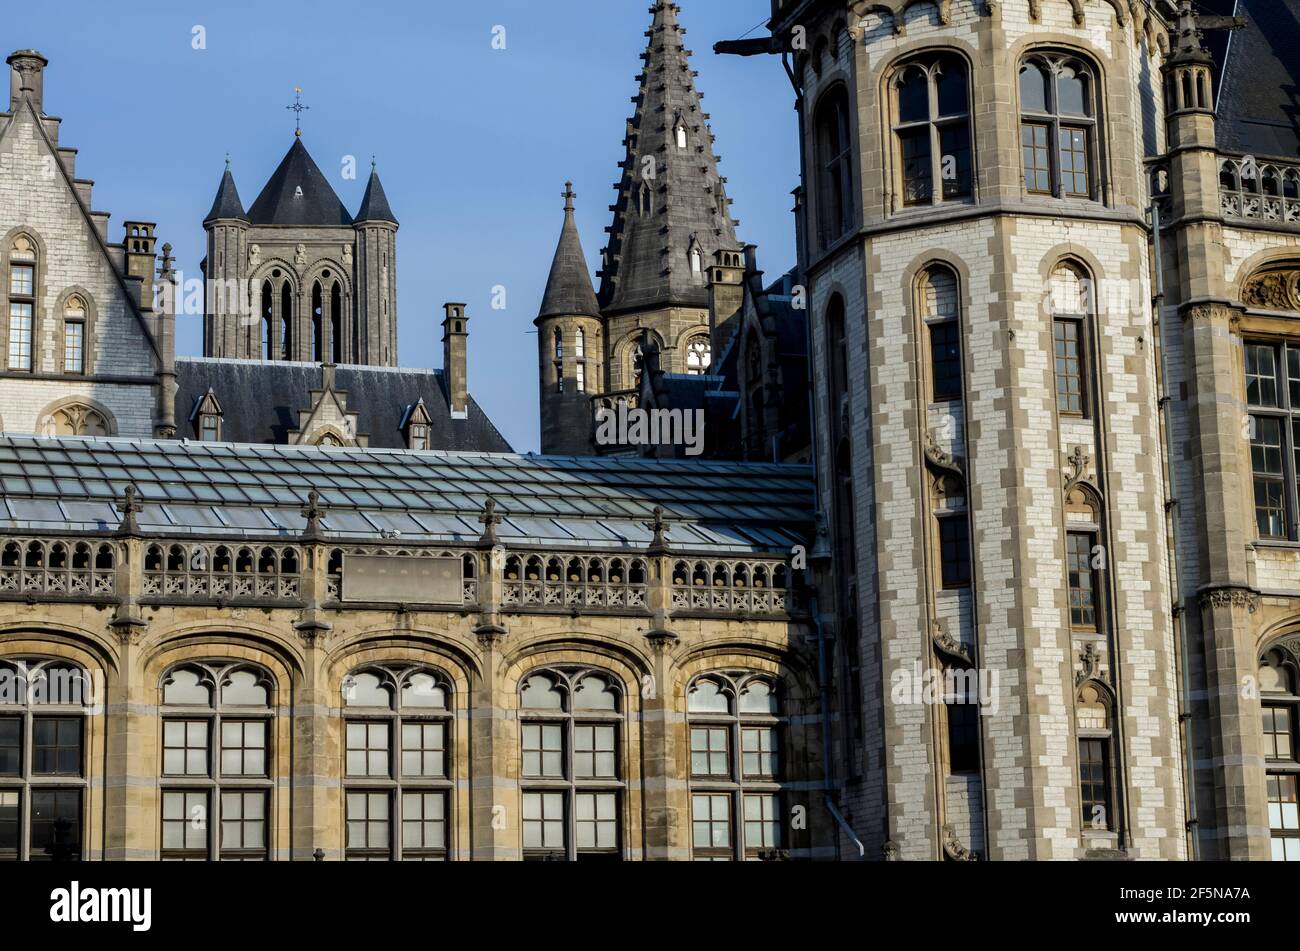 Details of the facades of buildings on Graslei, Ghent, Belgium. Stock Photo